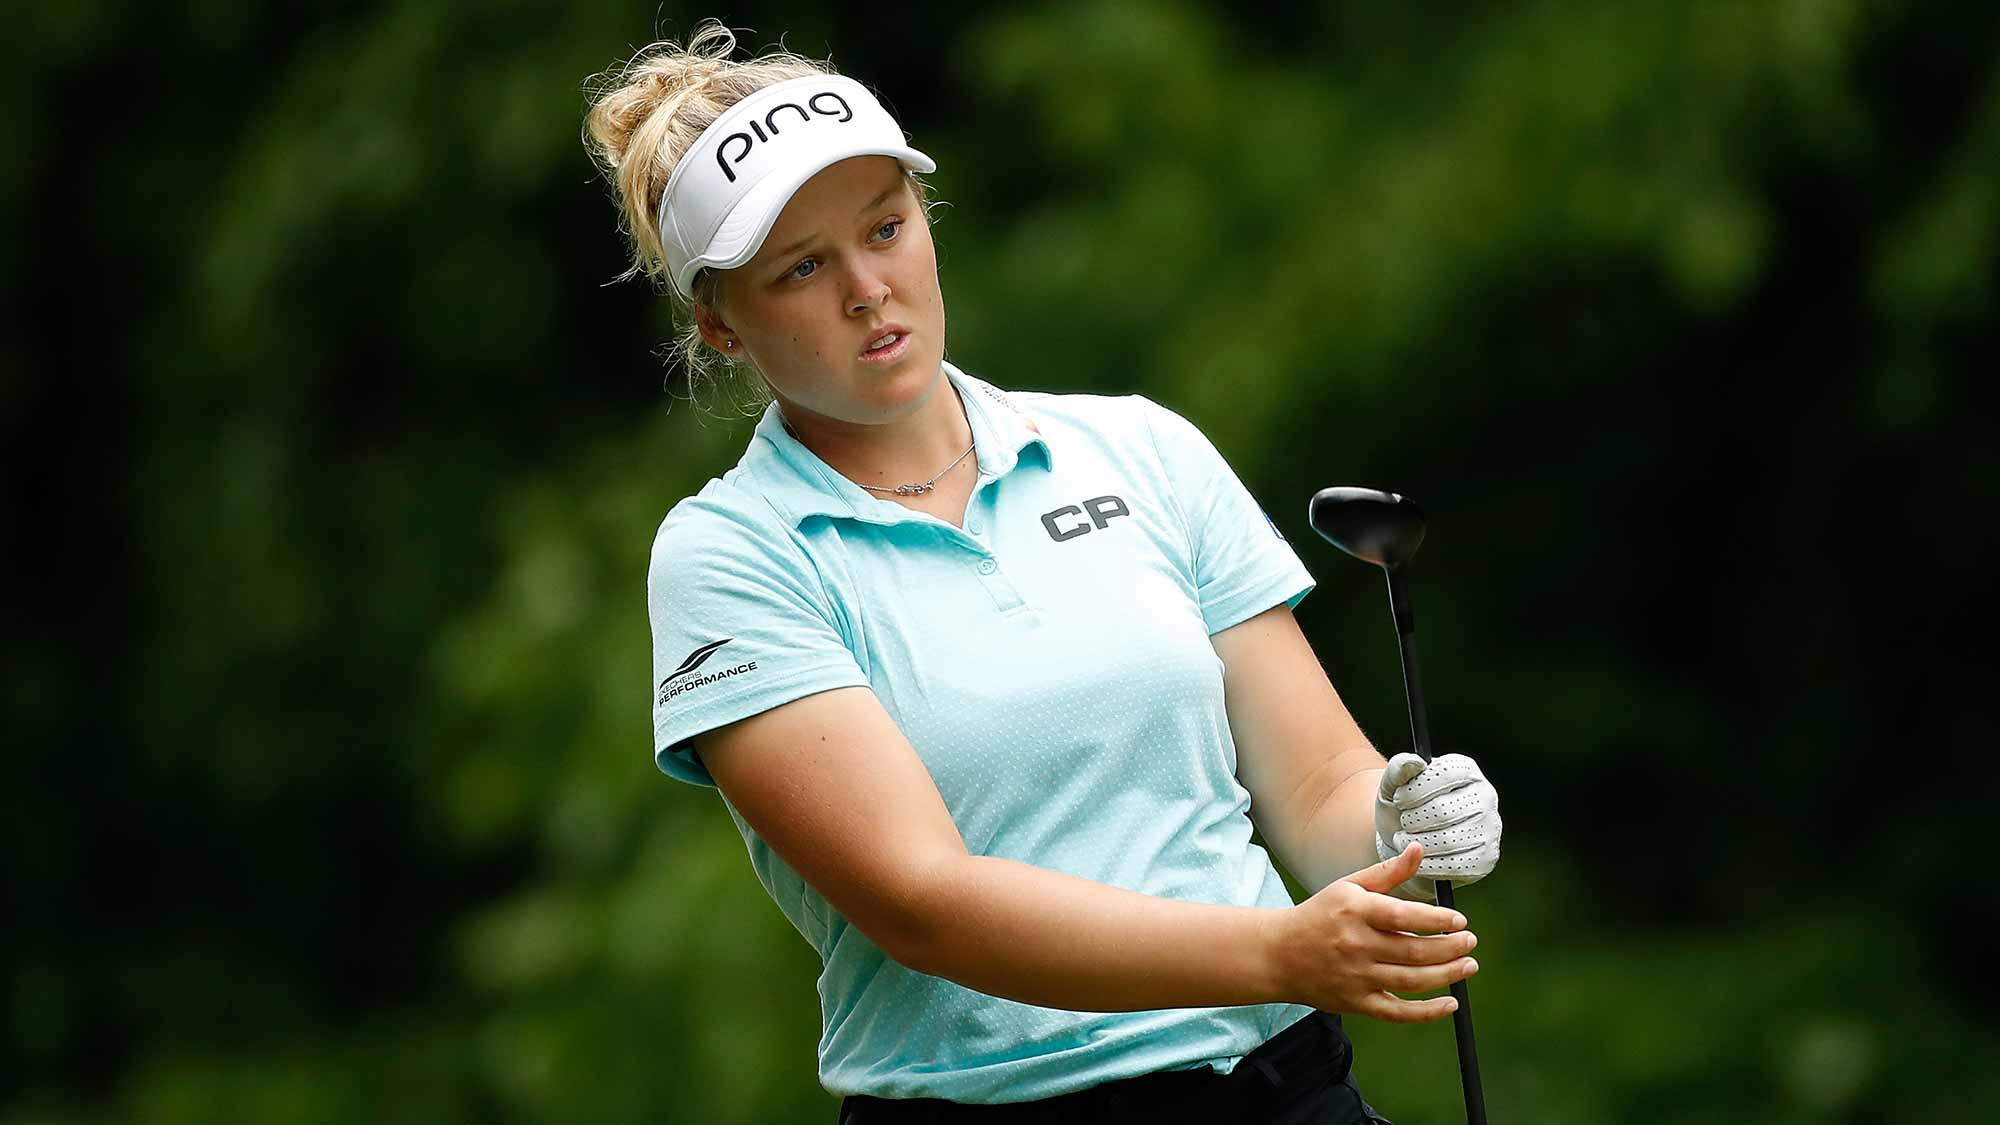 Brooke Henderson of Canada watches her drive on the seventh hole during the first round of the LPGA Volvik Championship on May 25, 2017 at Travis Pointe Country Club Ann Arbor, Michigan